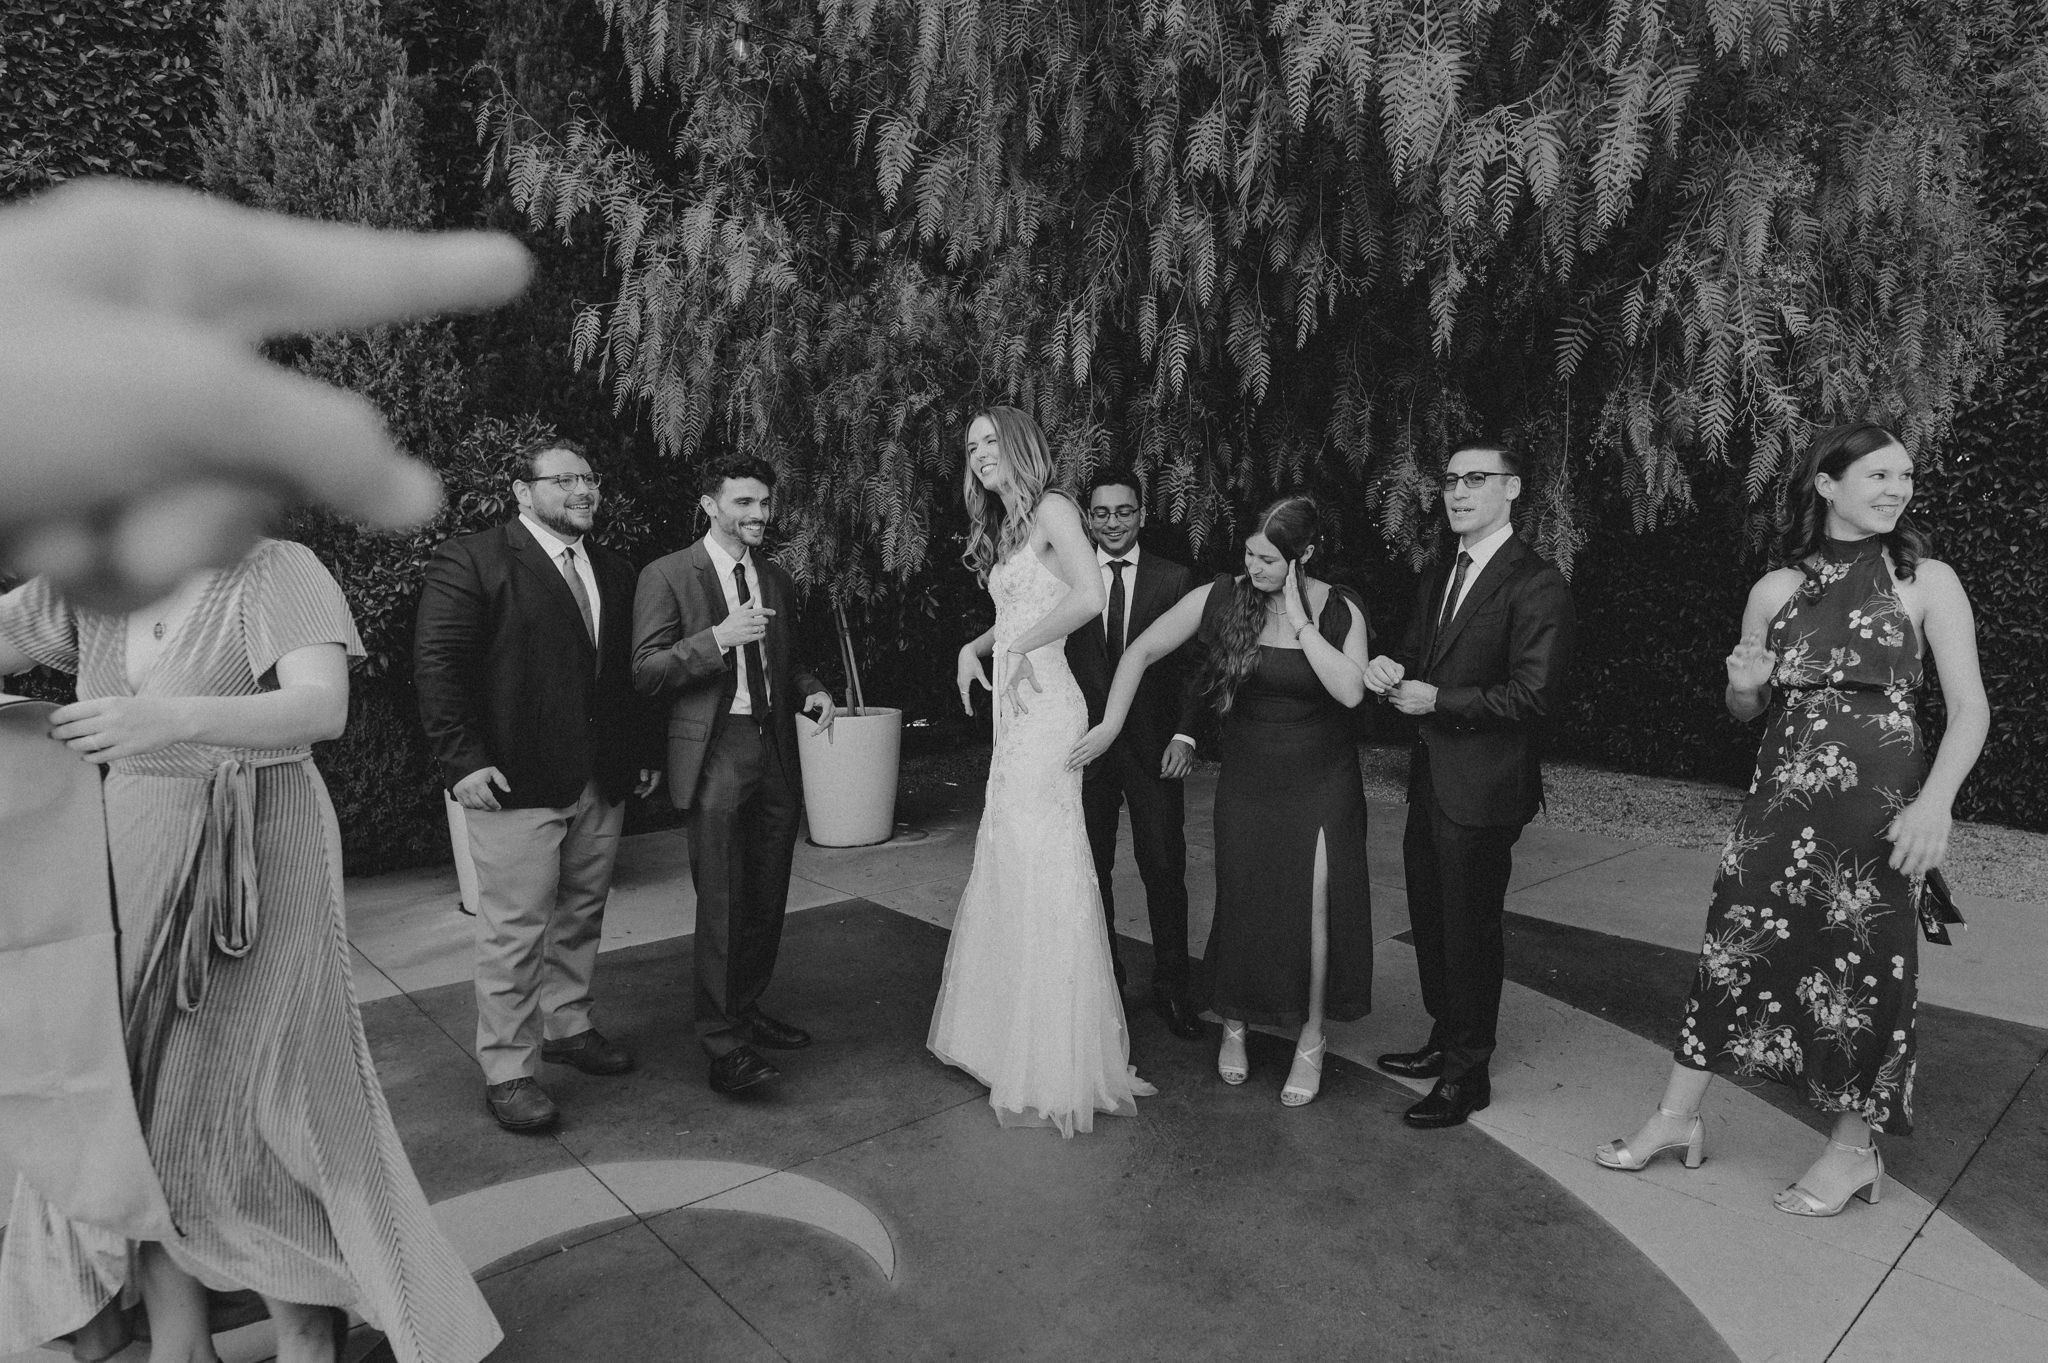 the fig house wedding - queer wedding photographers in los angeles - itlaphoto.com-43.jpg